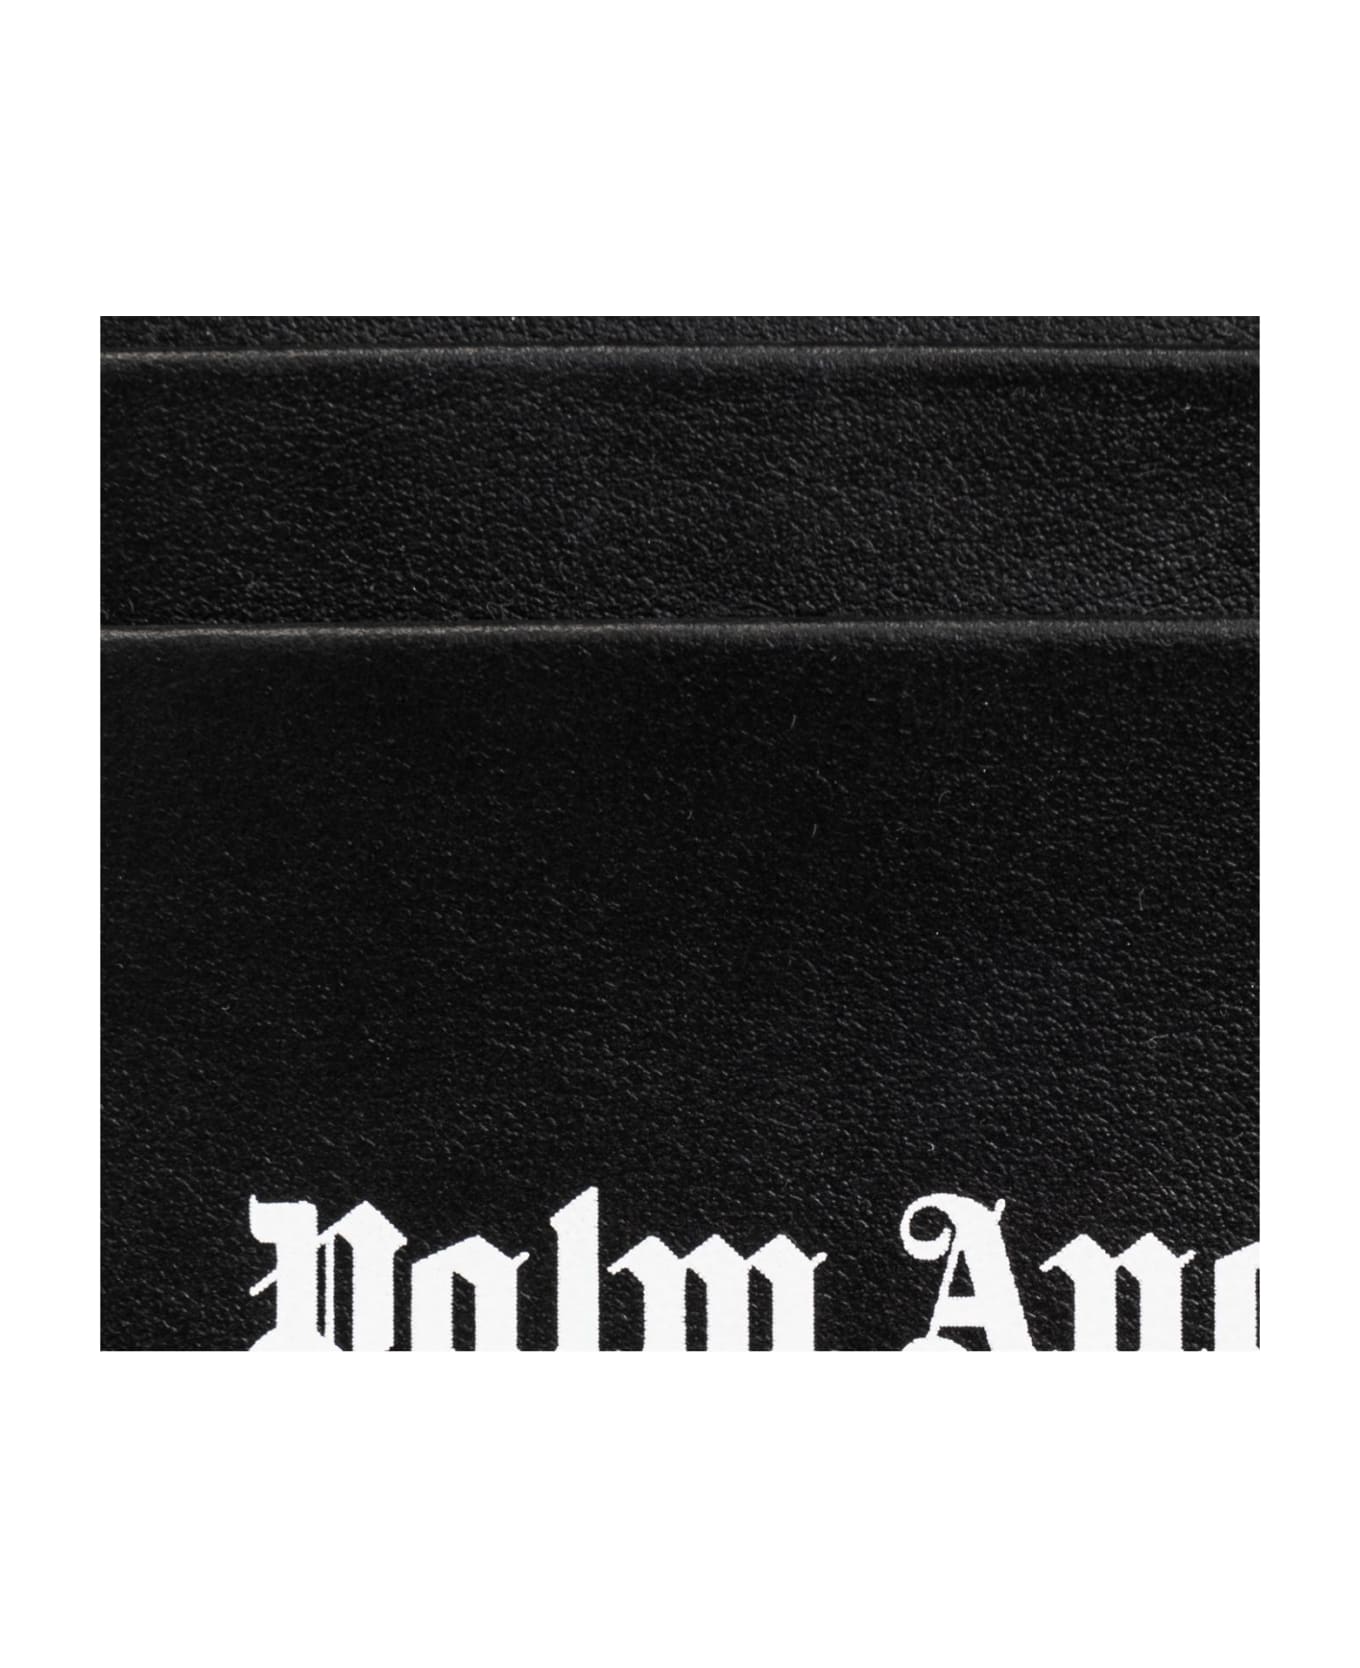 Palm Angels Card Case With Logo - Black